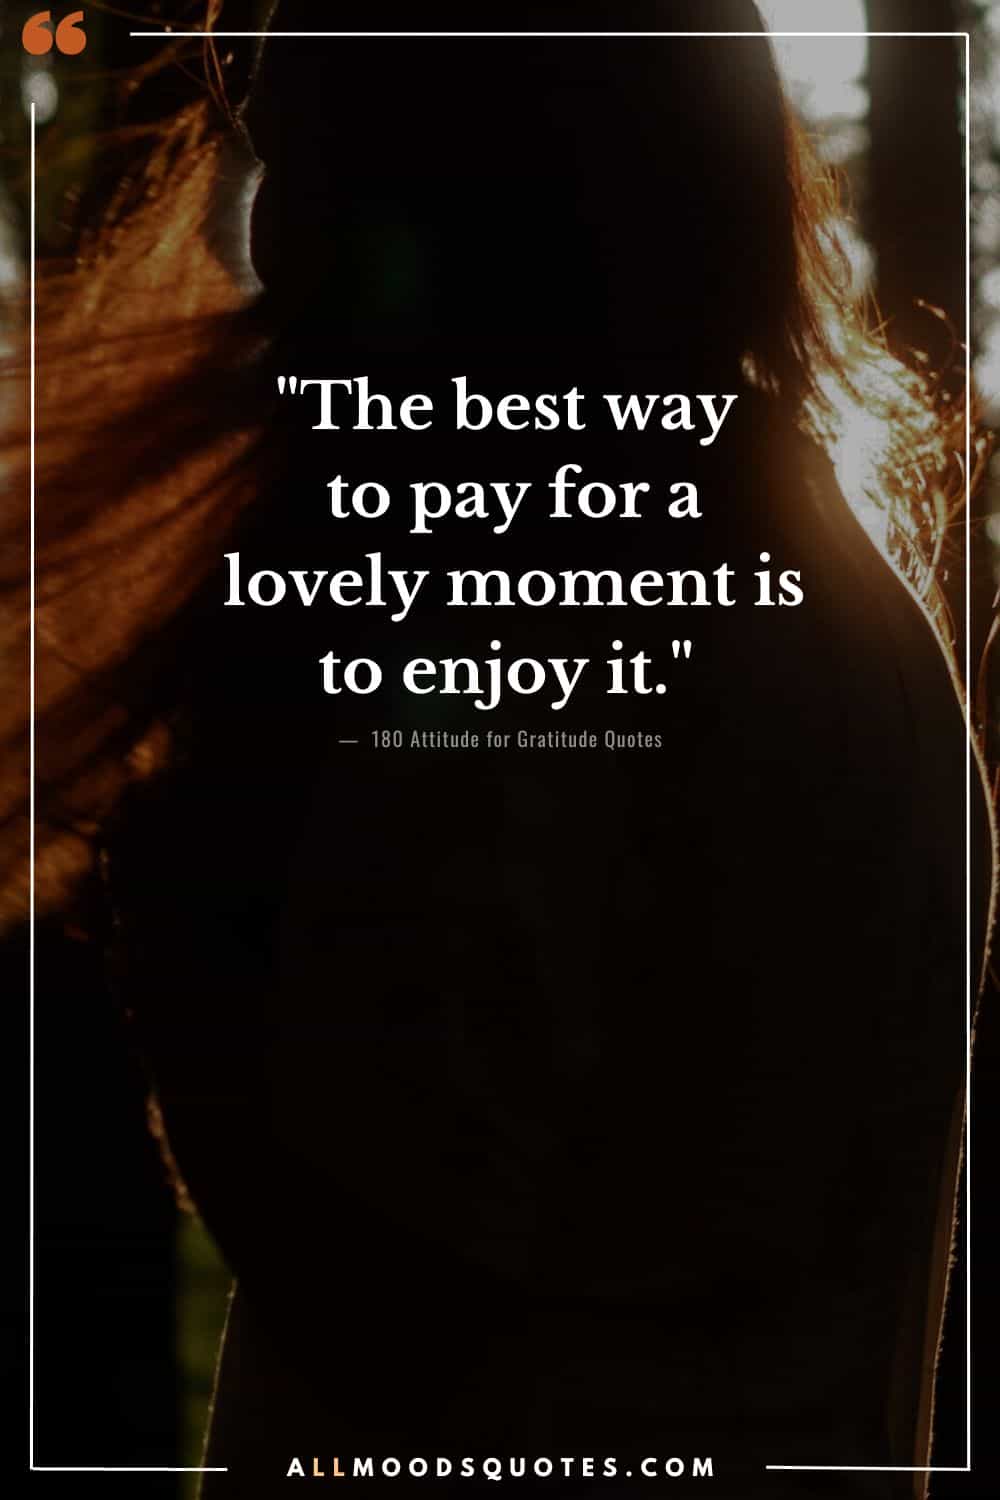 "The best way to pay for a lovely moment is to enjoy it." - Ralph Waldo Emerson